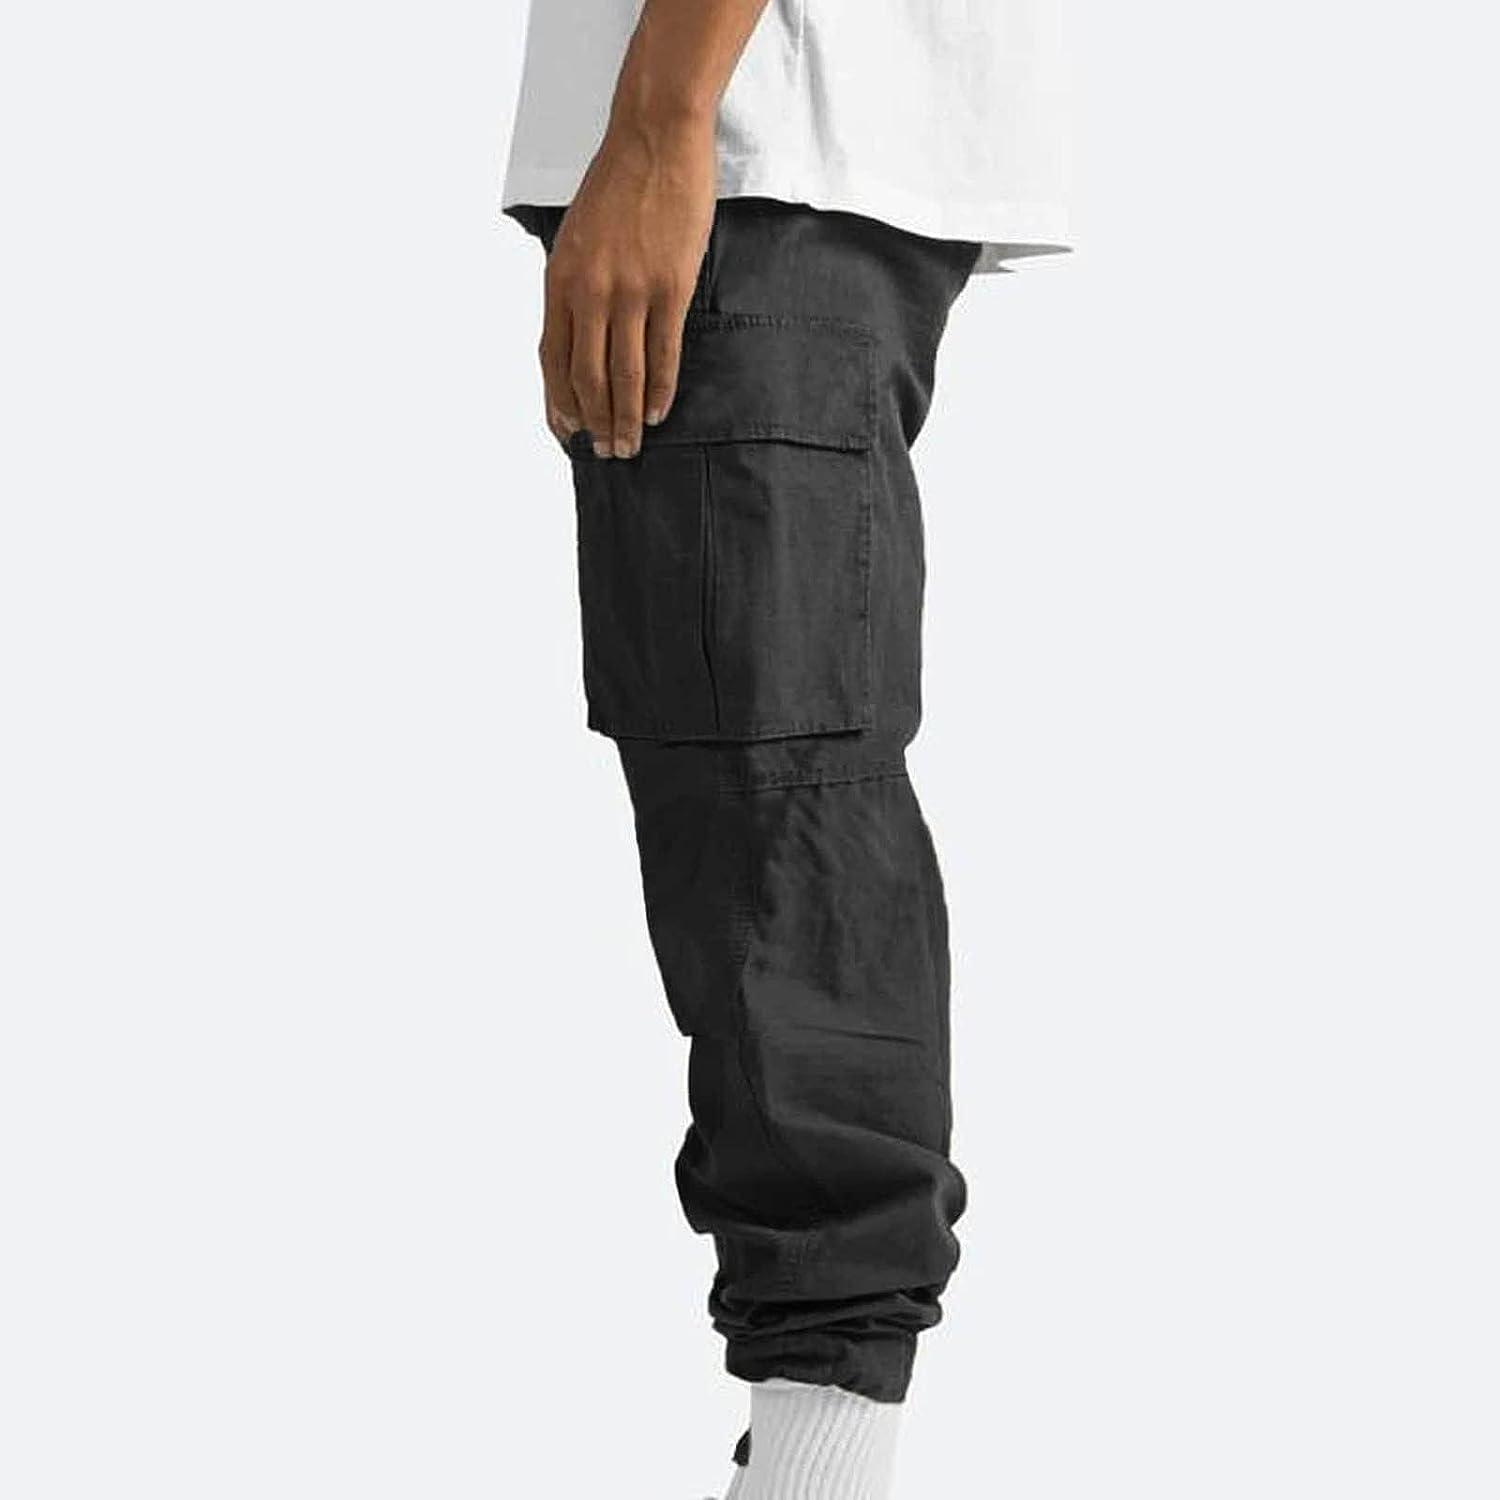 Cargo Pants for Men Relaxed Fit Causal Slim Beach Work Streetwear